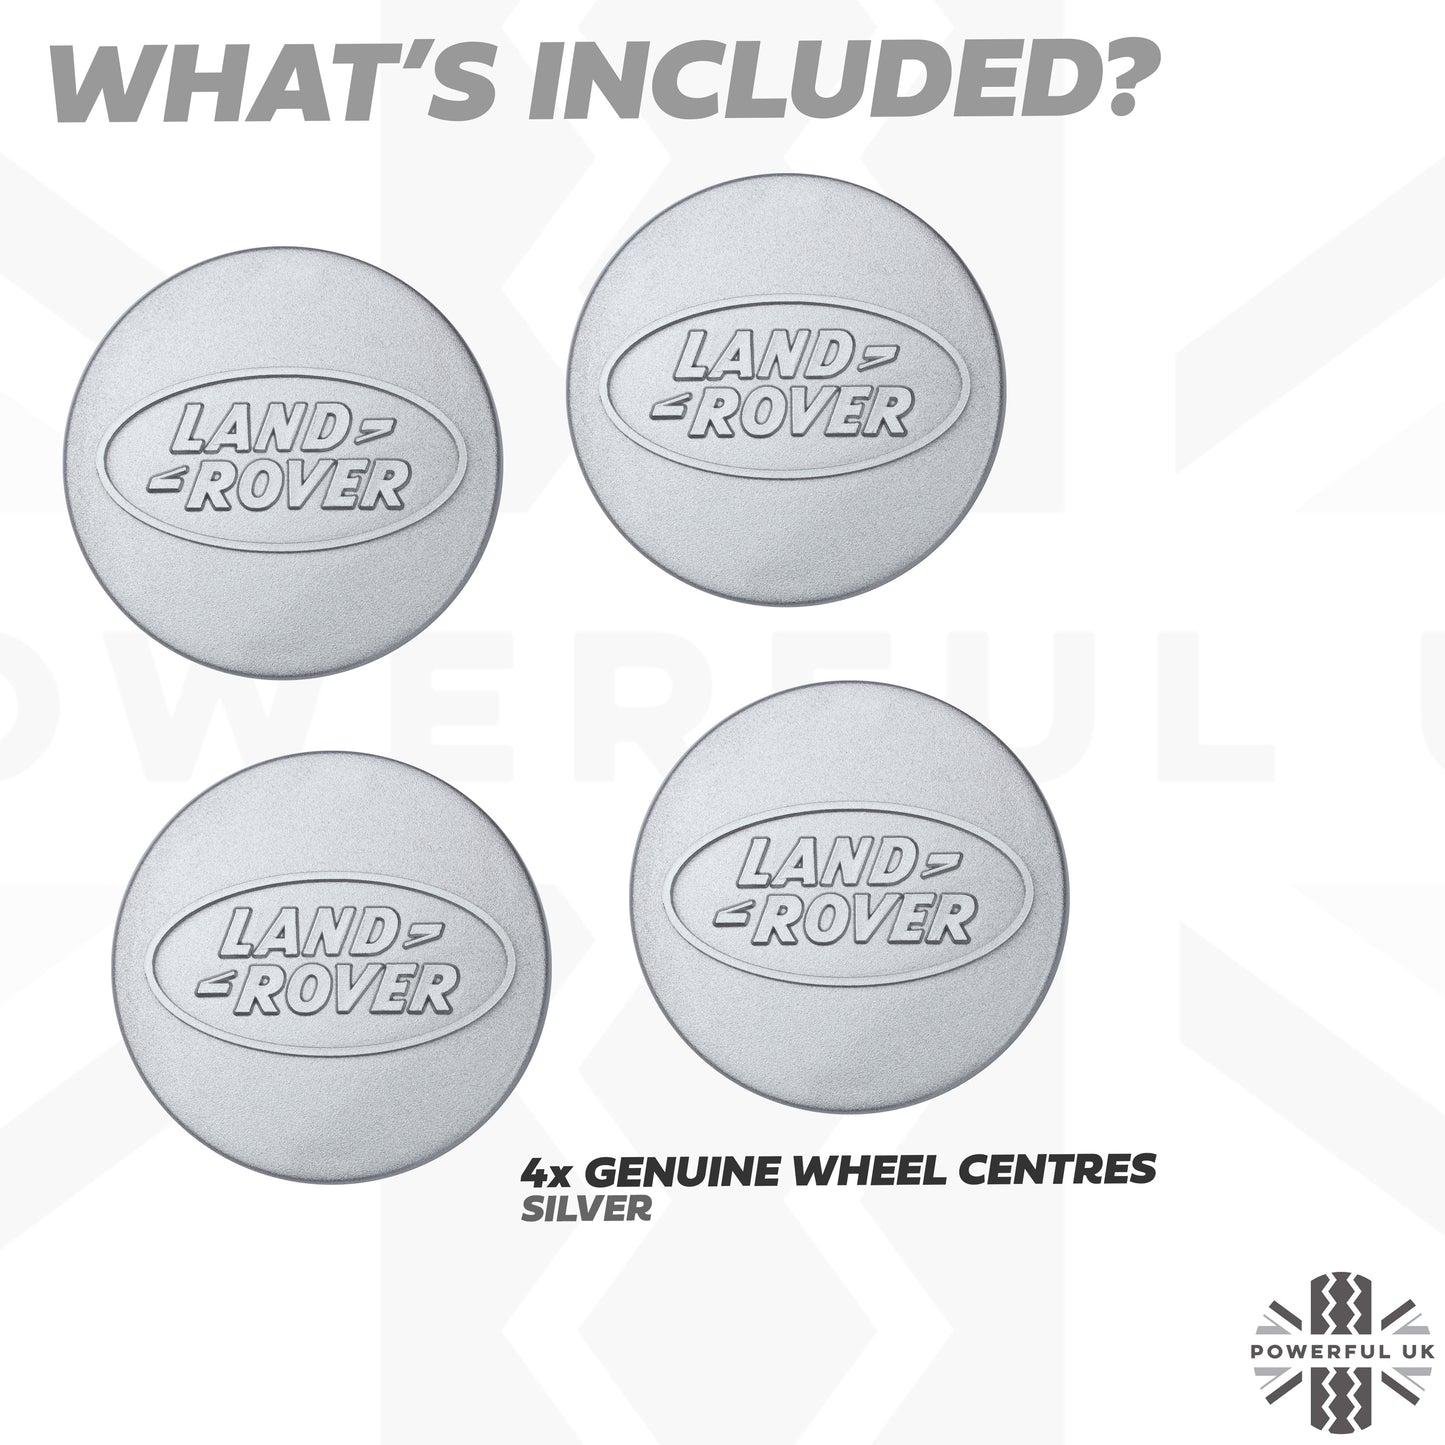 Genuine 4x Alloy Wheel Centre Caps for Land Rover Discovery 1 - Silver